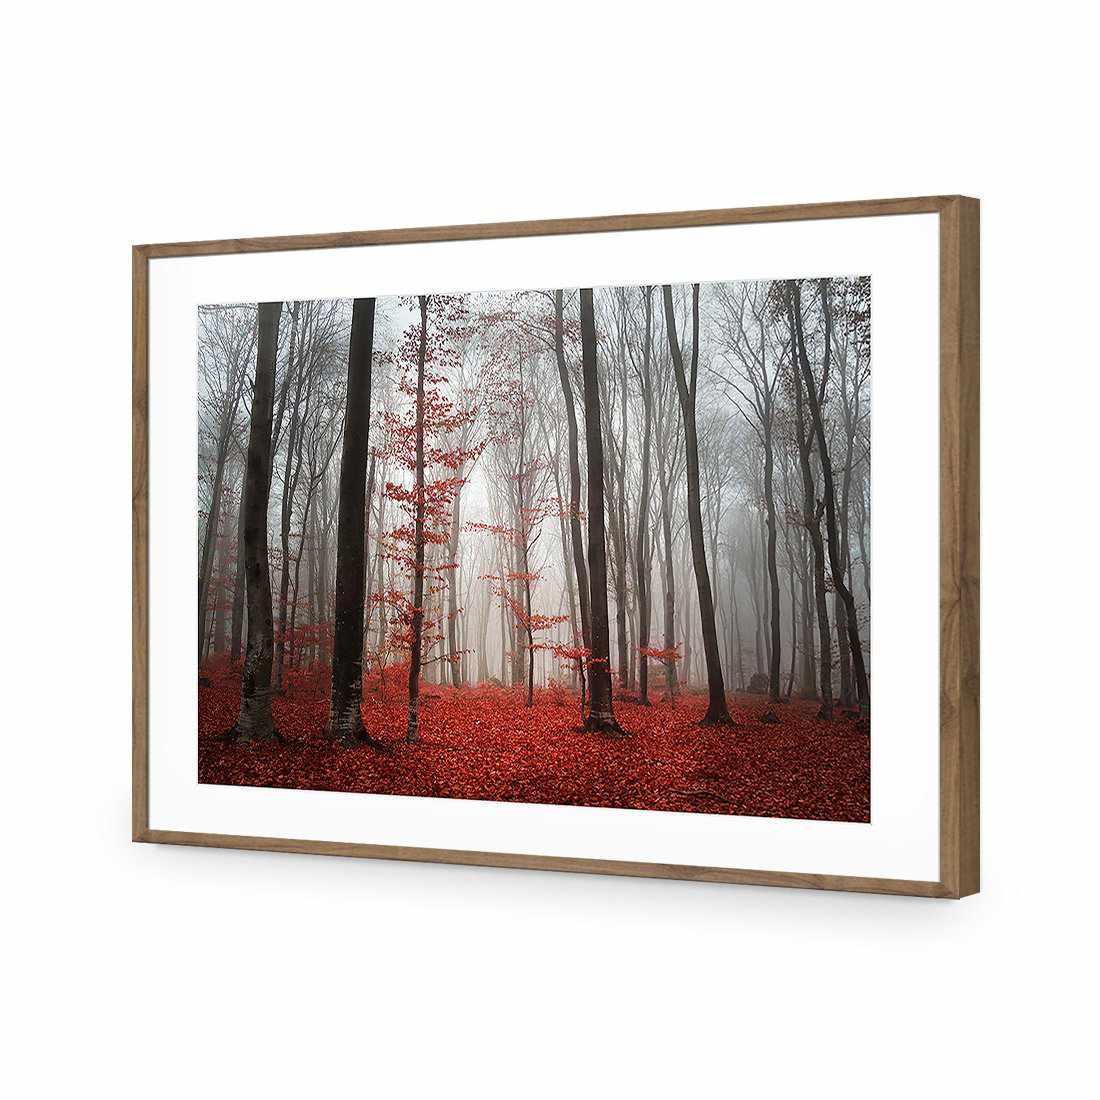 Scarlet Forest-Acrylic-Wall Art Design-With Border-Acrylic - Natural Frame-45x30cm-Wall Art Designs